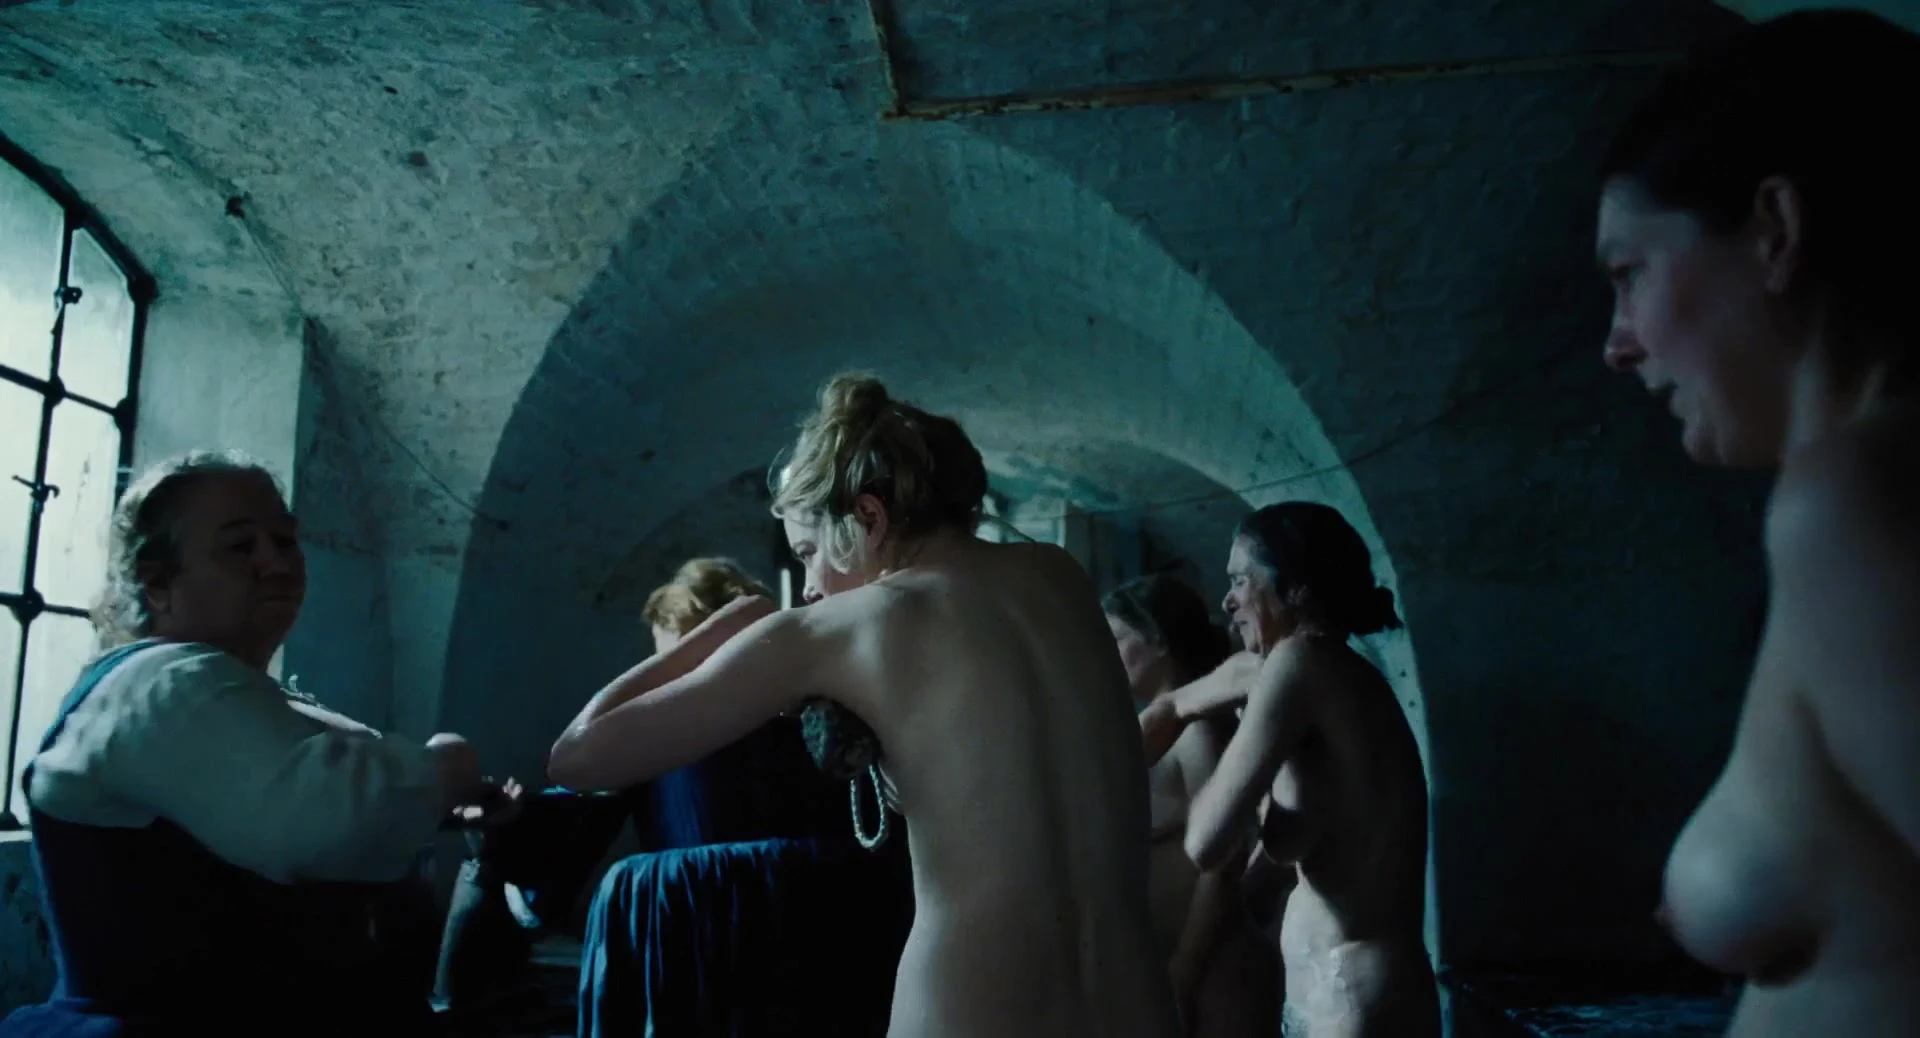 The favourite naked scene